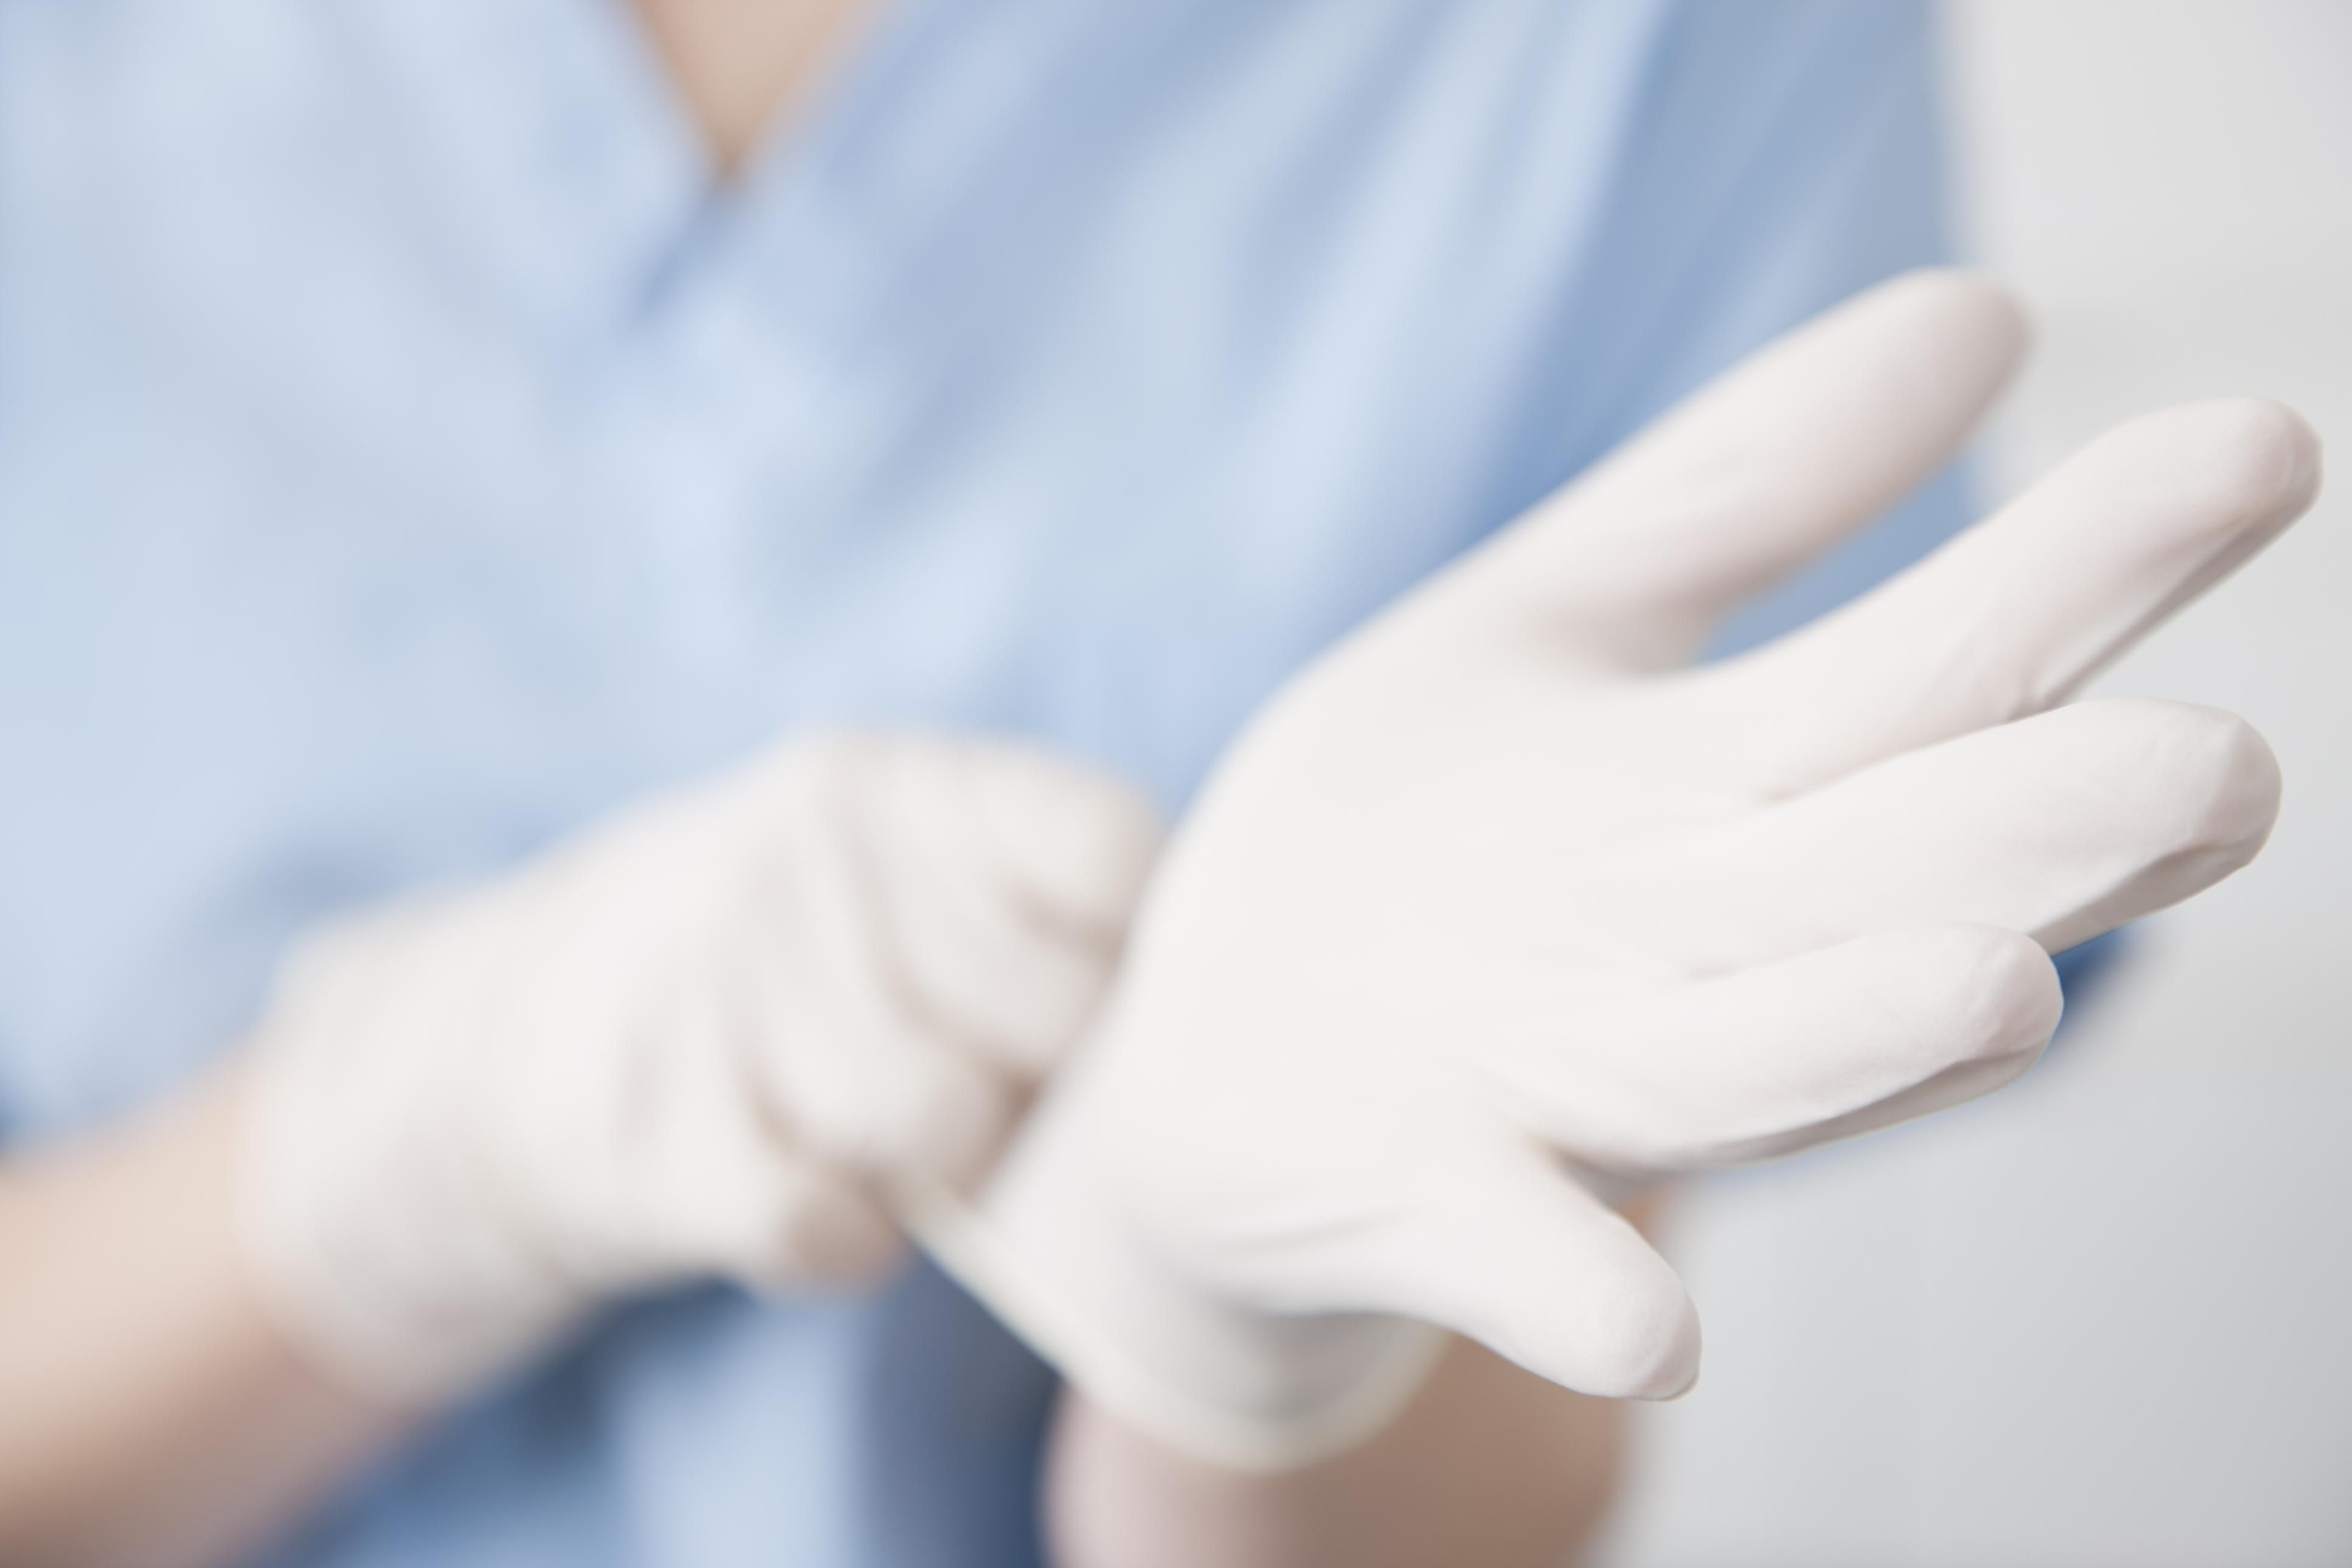 surgical hand gloves